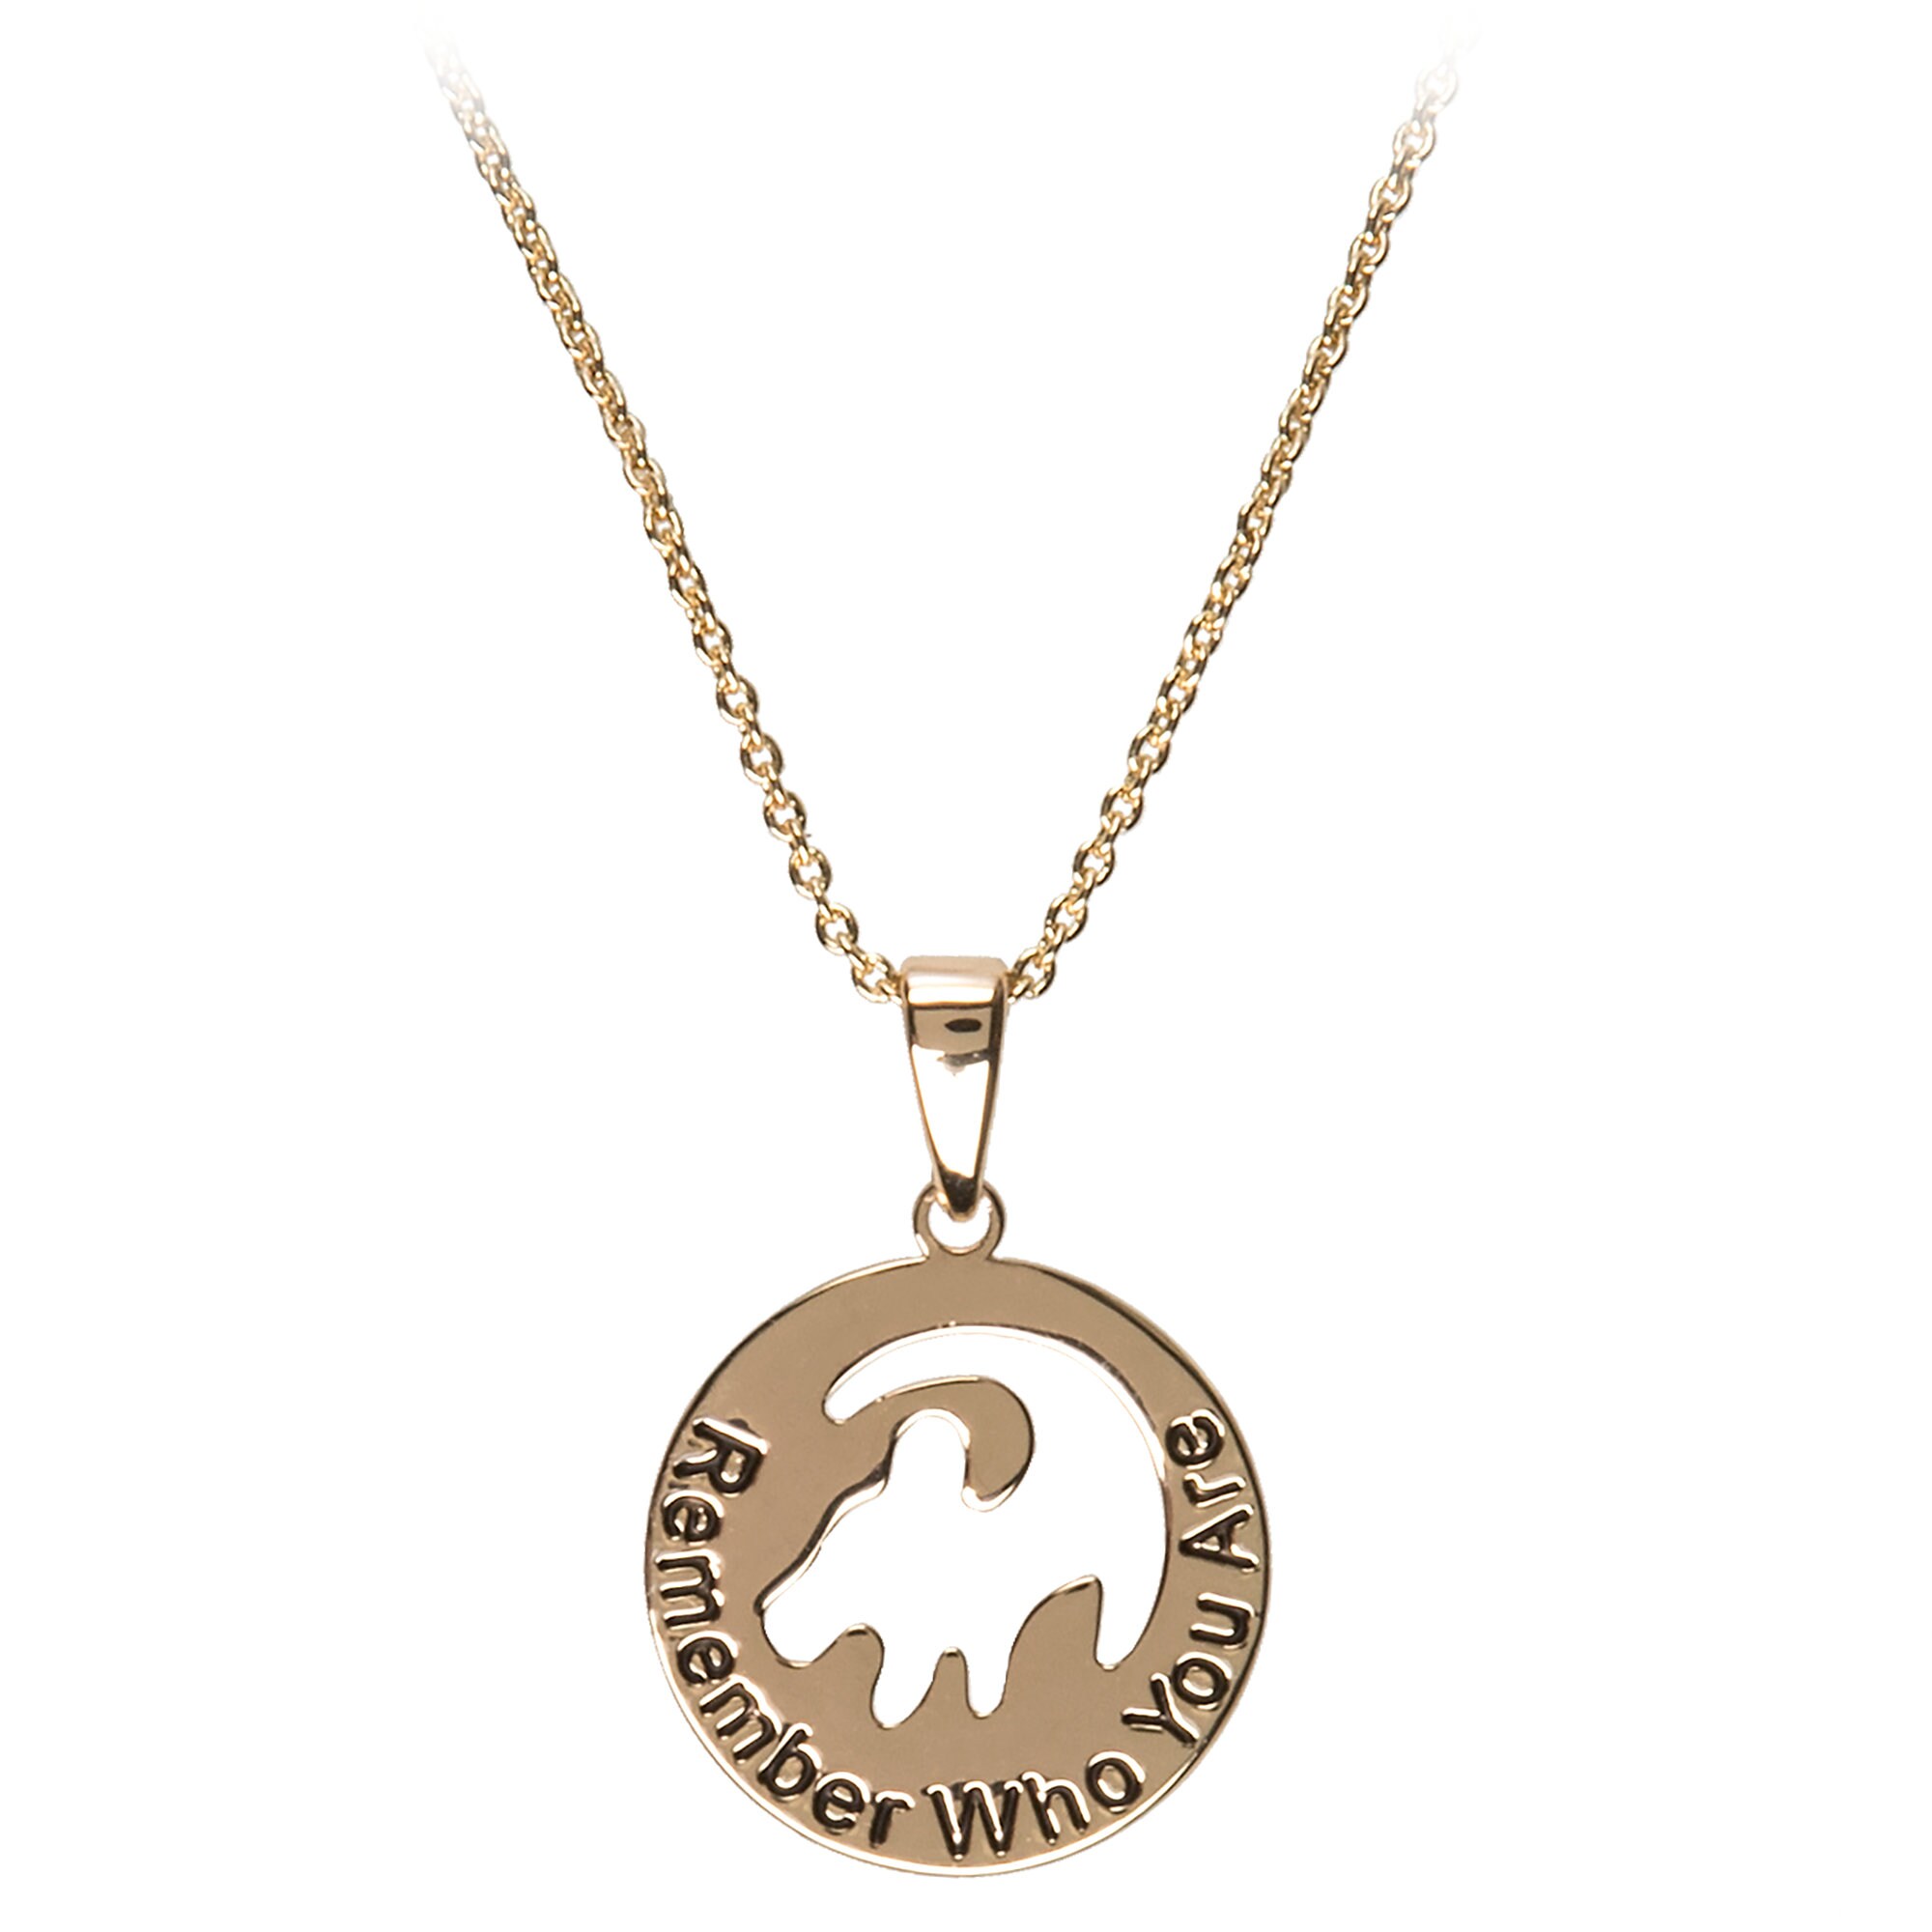 The Lion King Necklace - The Lion King 2019 Film